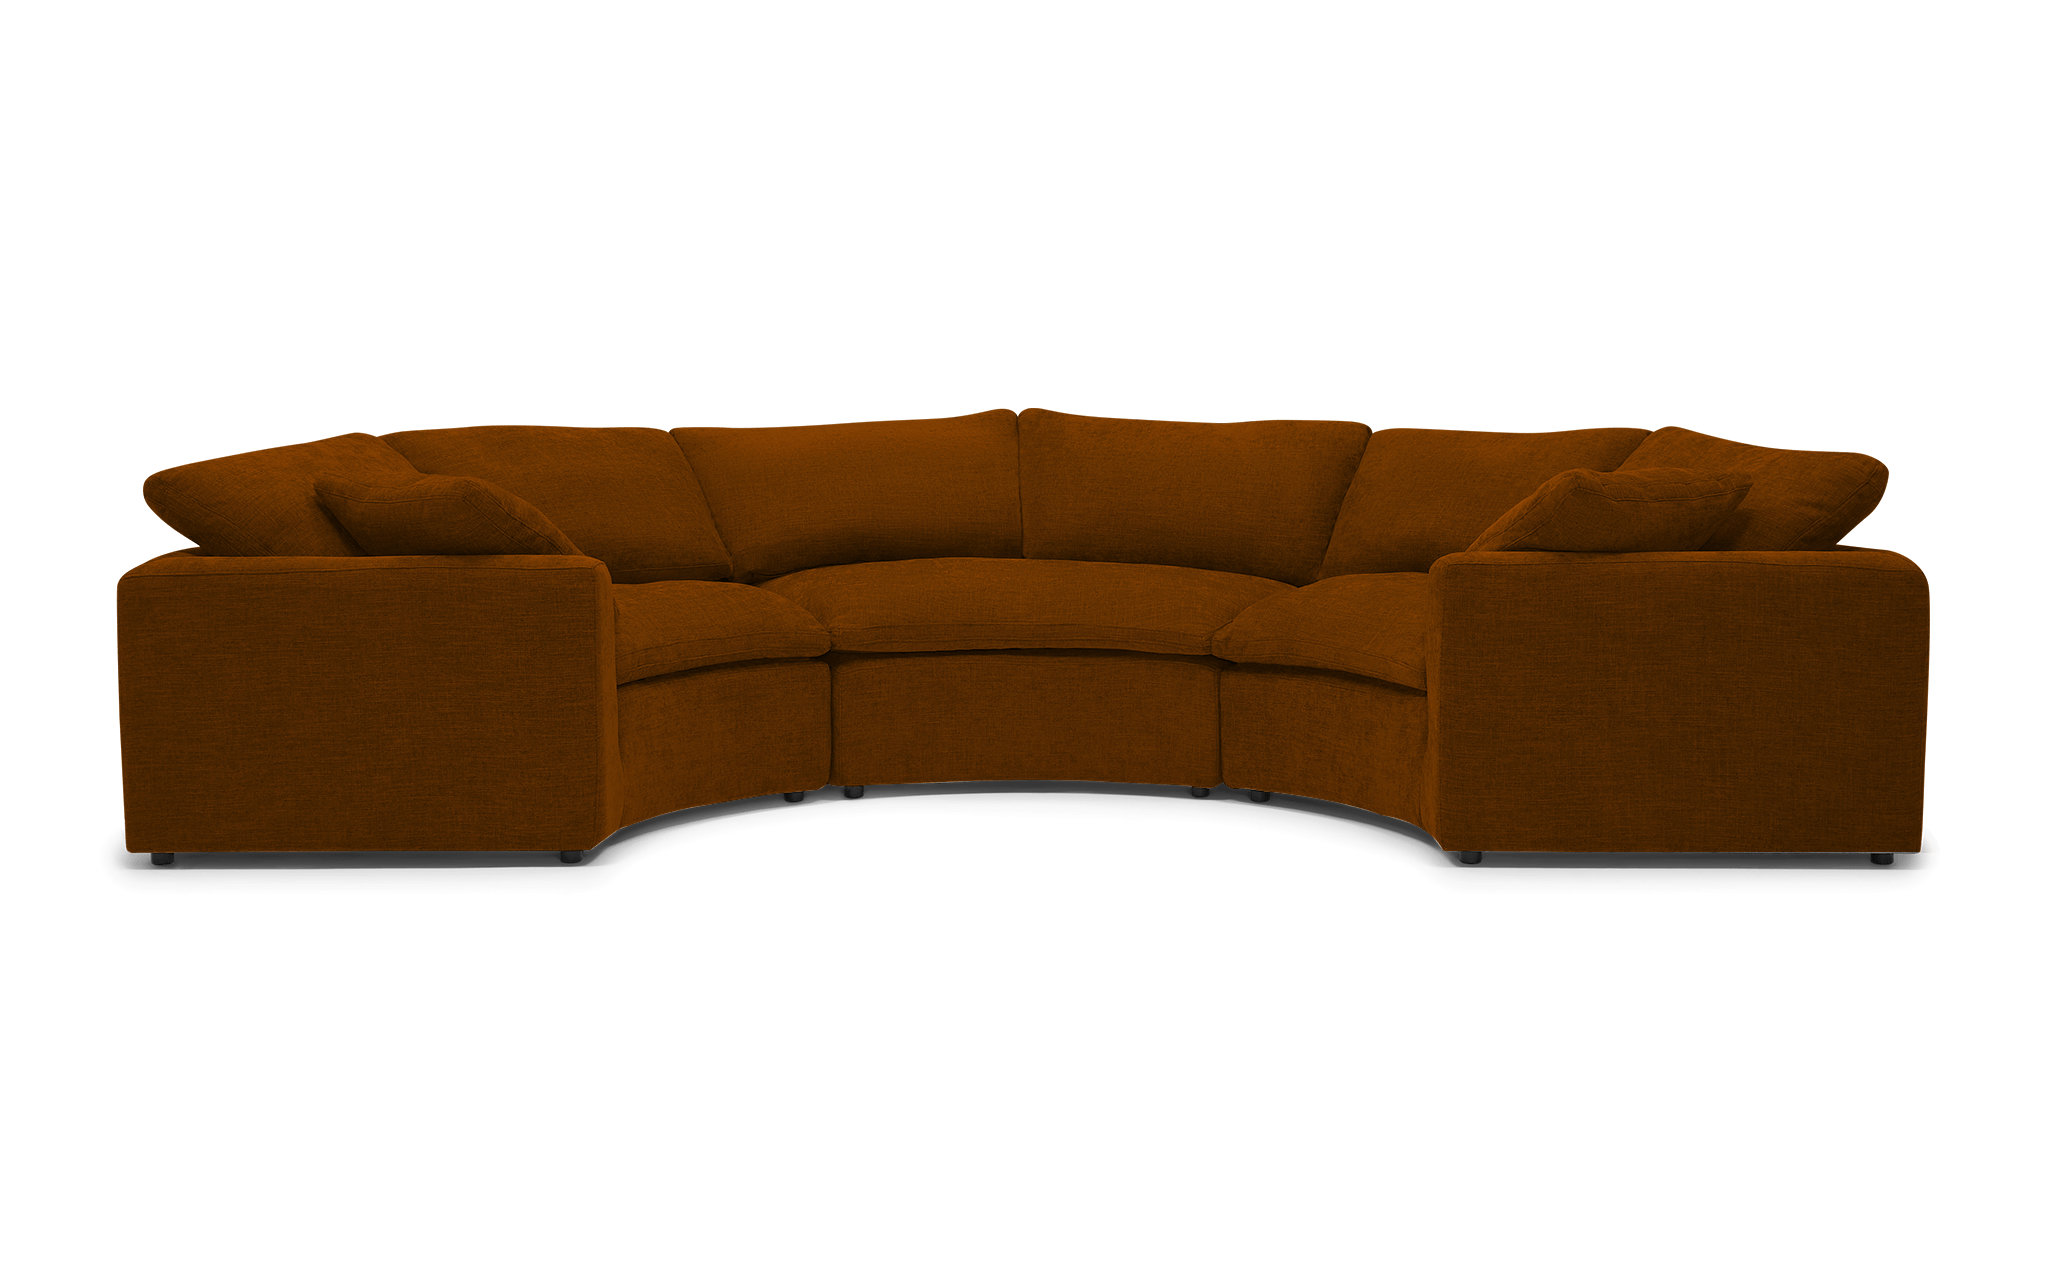 Bryant Semicircle Sectional (3 Piece) | Sectional, Curved Sectional Inside 130" Curved Sectionals (View 8 of 15)